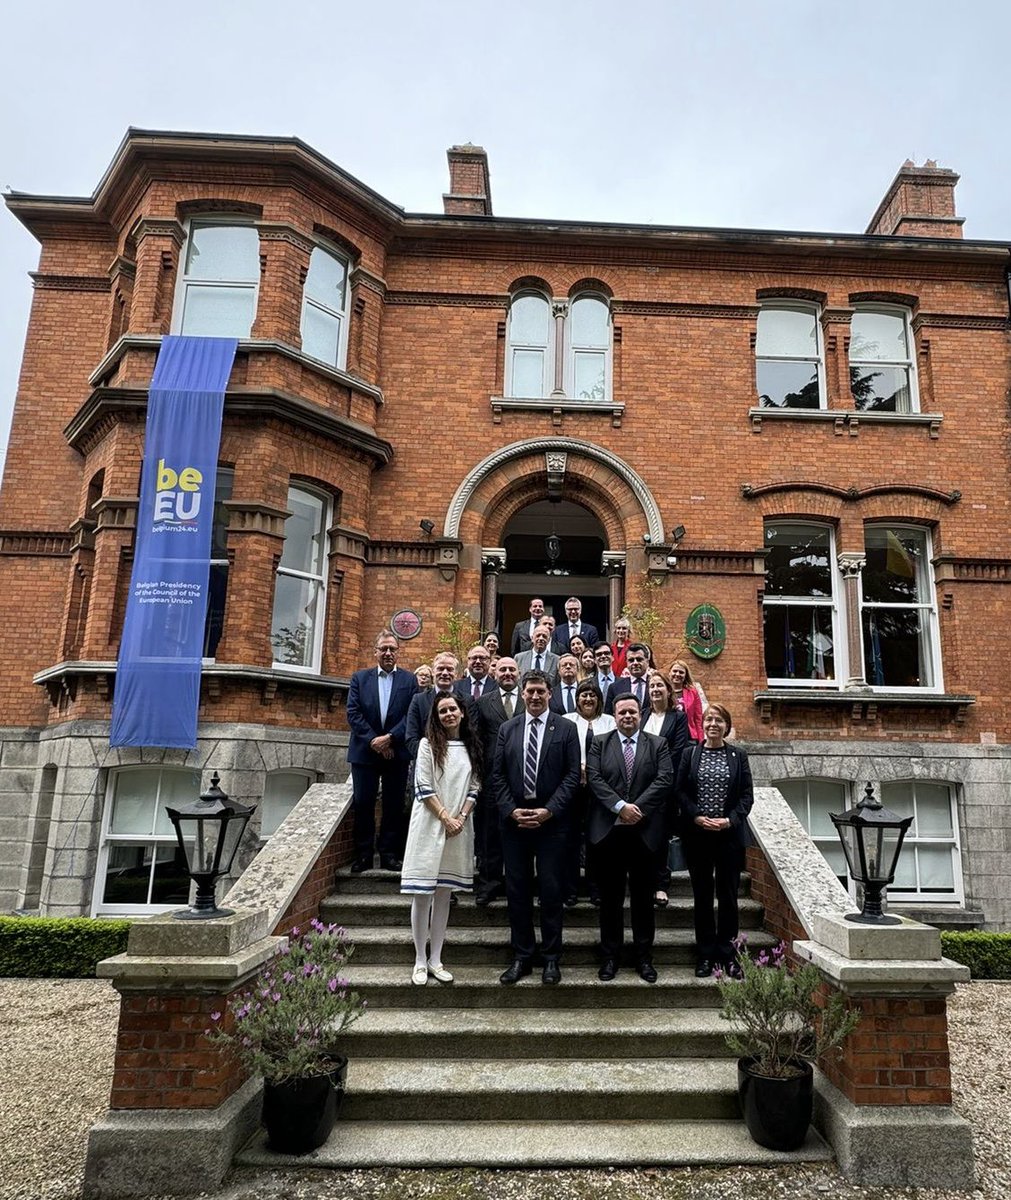 🙏 @EamonRyan for celebrating #EuropeDay with the @EU Ambassadors in Ireland 🇮🇪! Rich discussion on @EU2024BE 🇧🇪priority for a green & just transition, #offshore, #connectivity, #biodiversity & #nuclearenergy. Long live 🇪🇺! Vive l’🇪🇺! Lang leve 🇪🇺